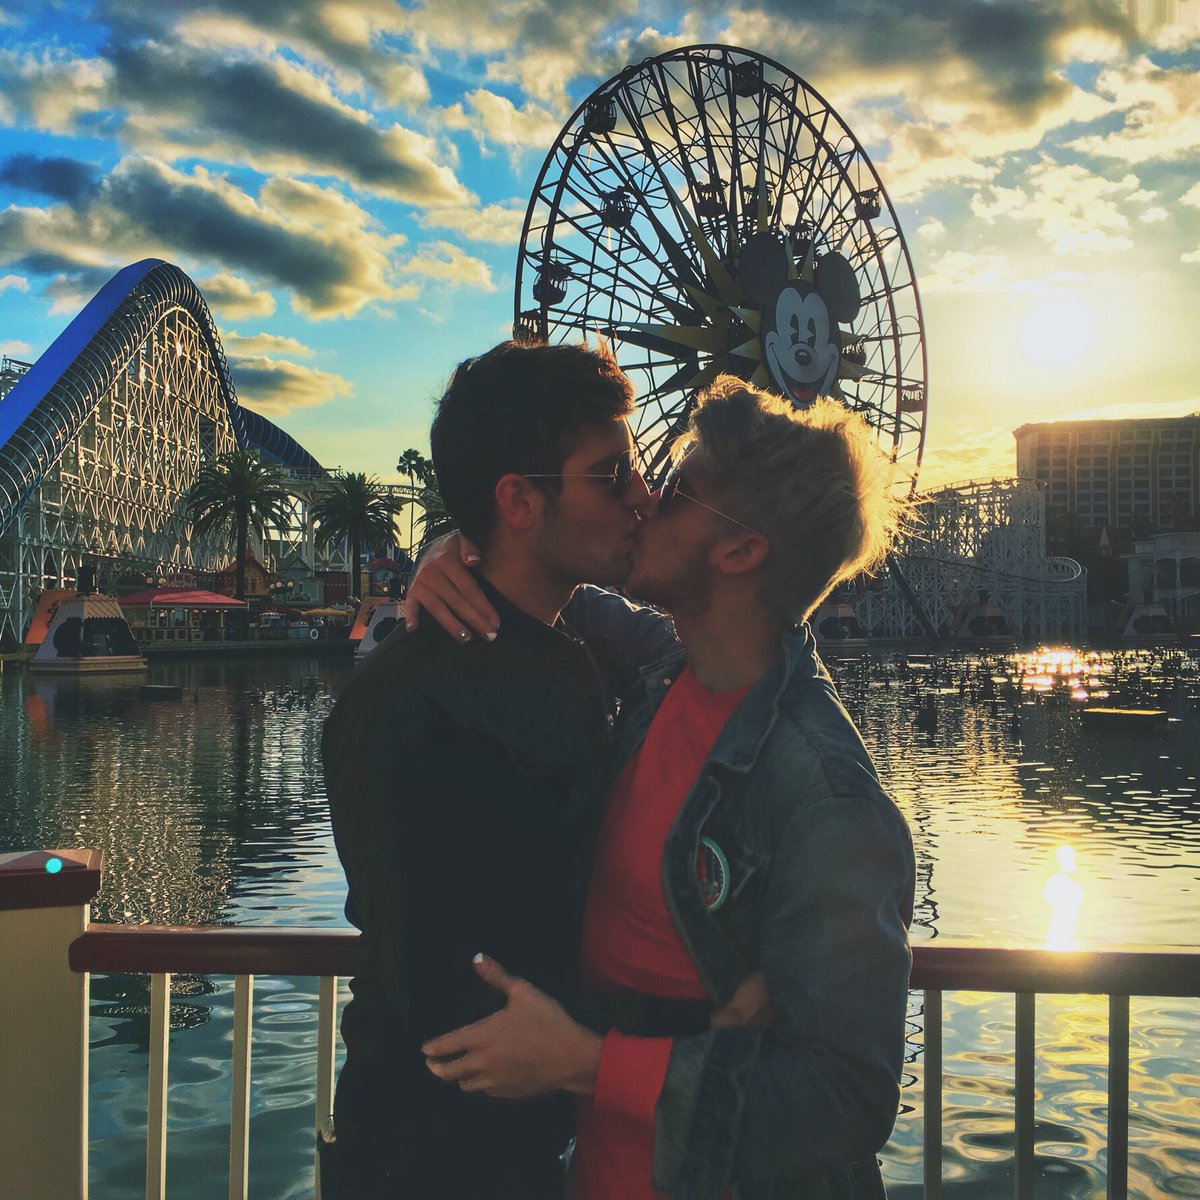 Disney kisses with my Prince Charming! ❤️